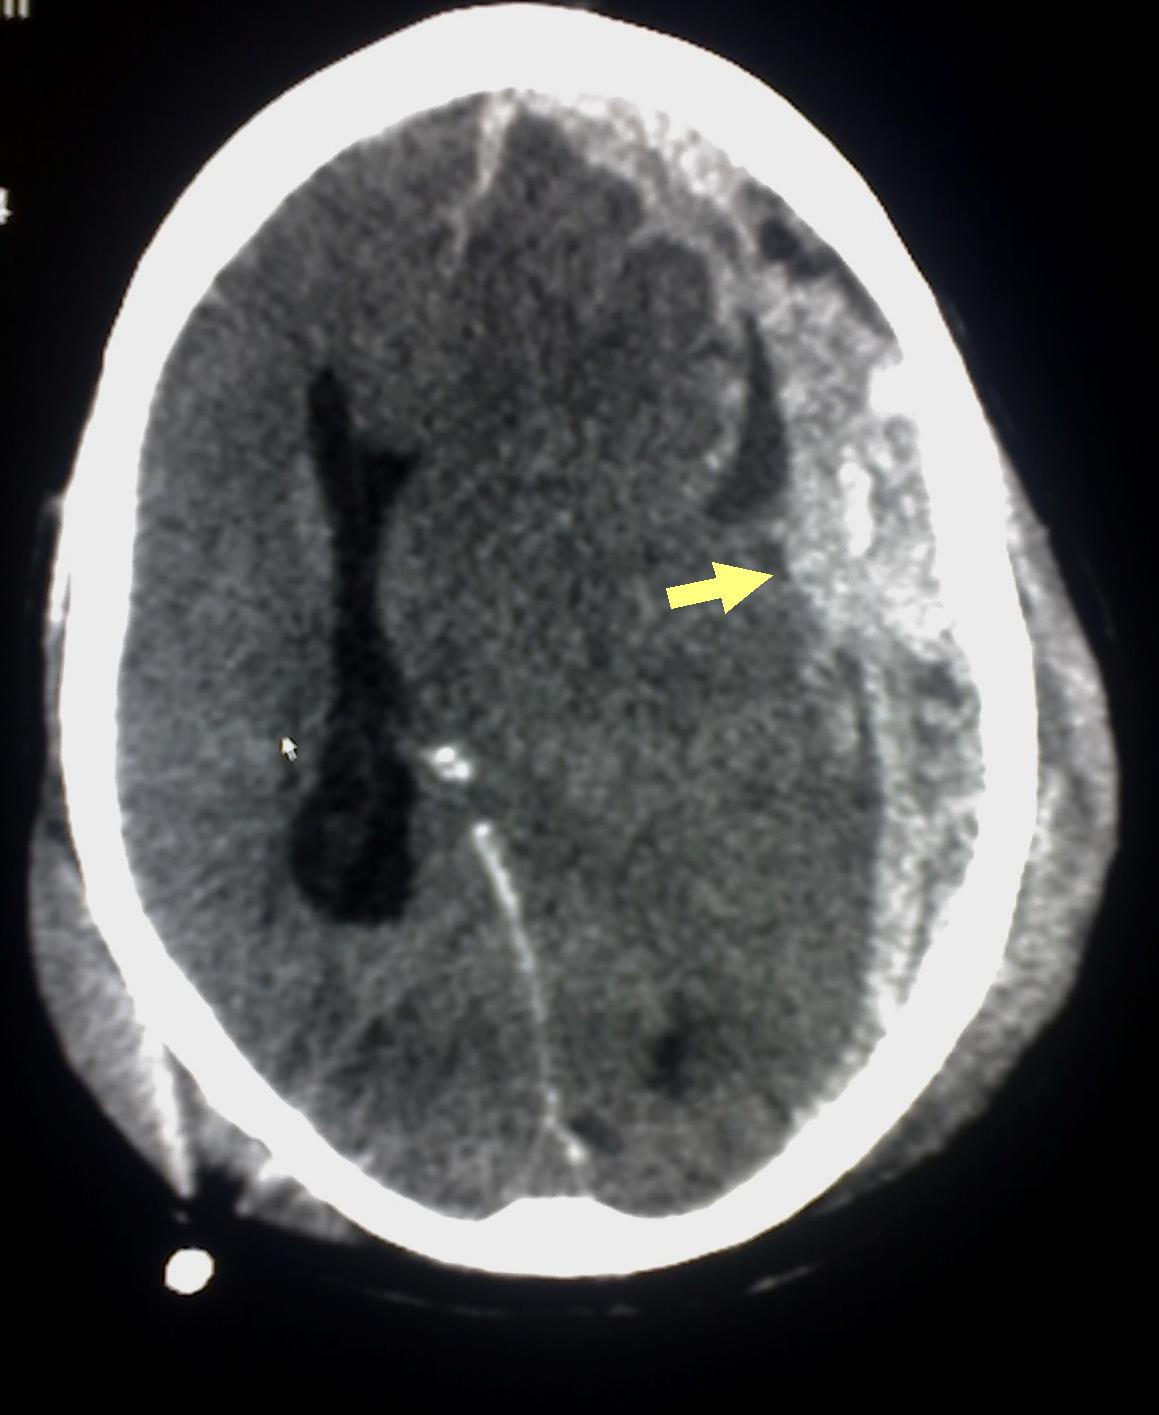 Abusive Head Trauma/Shaken Baby Syndrome/Subdural hematoma (arrow), bleeding between the dura mater of the meninges and the brain, commonly occurs in SBS/Abusive head trauma